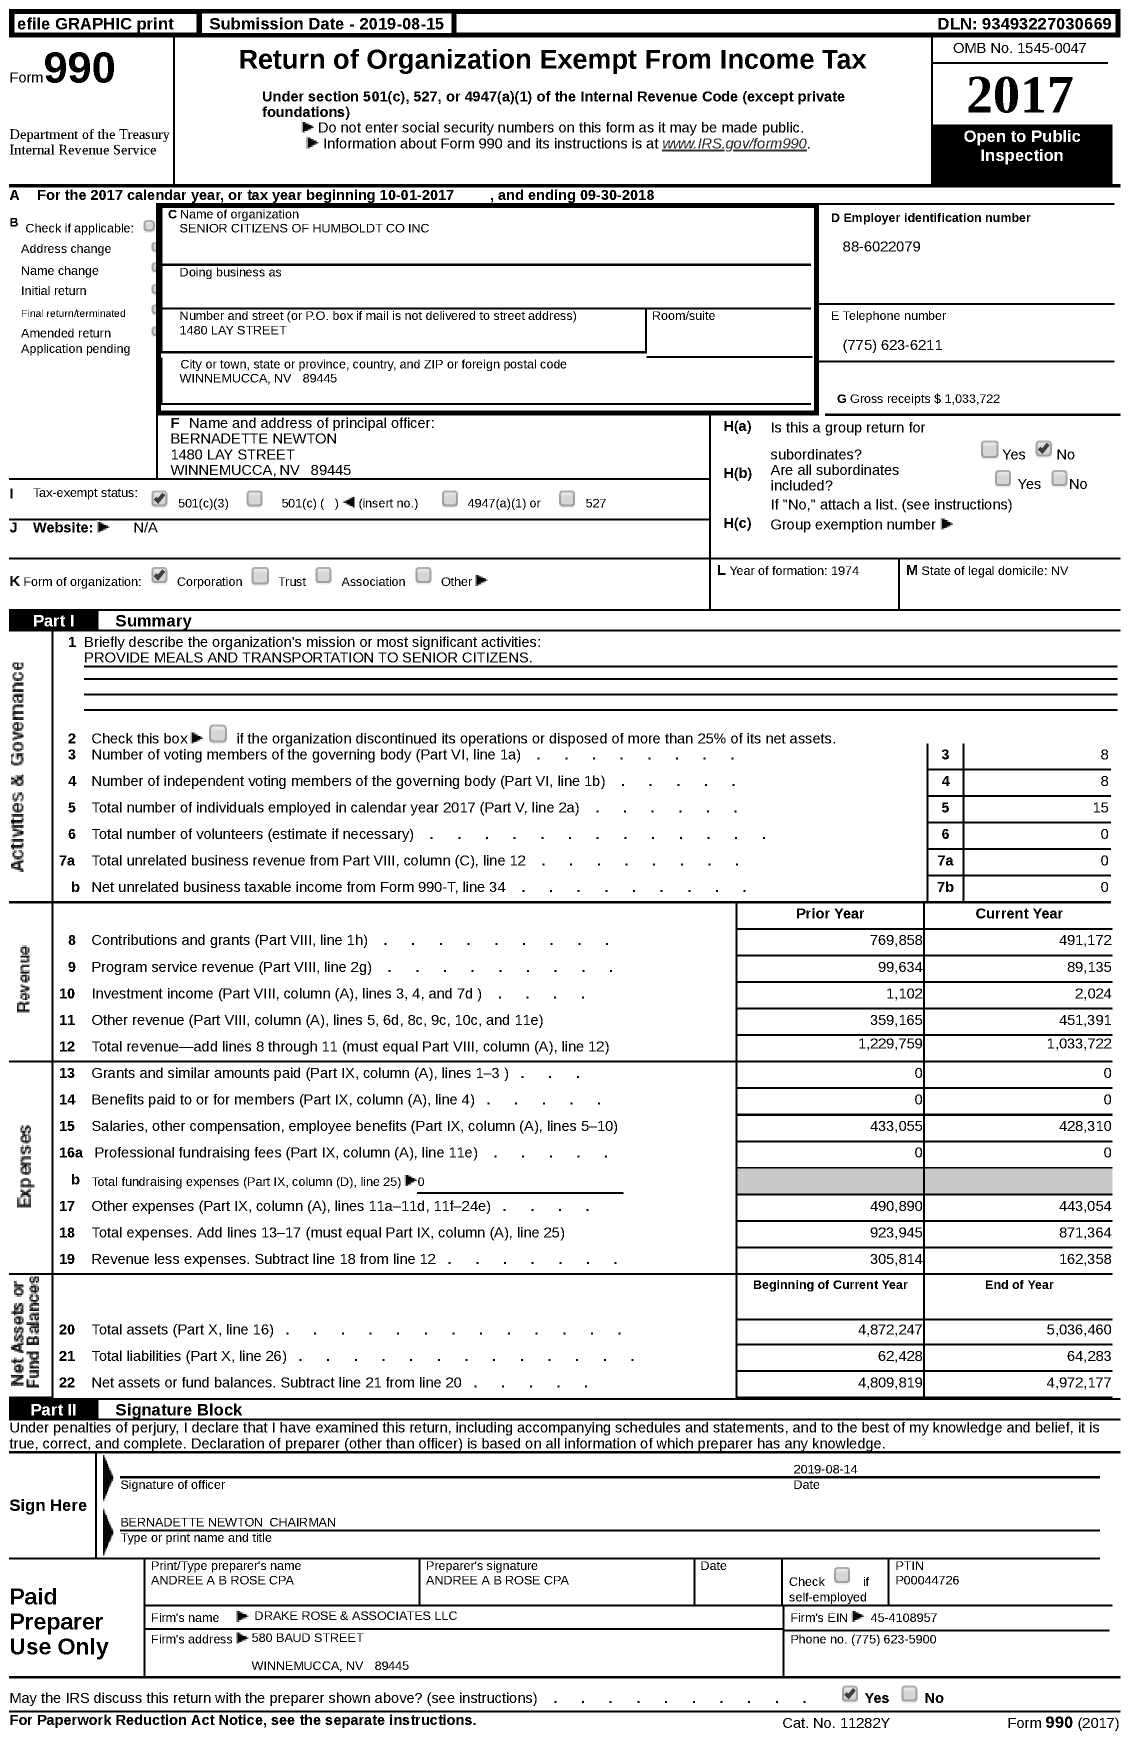 Image of first page of 2017 Form 990 for Senior Citizens of Humboldt